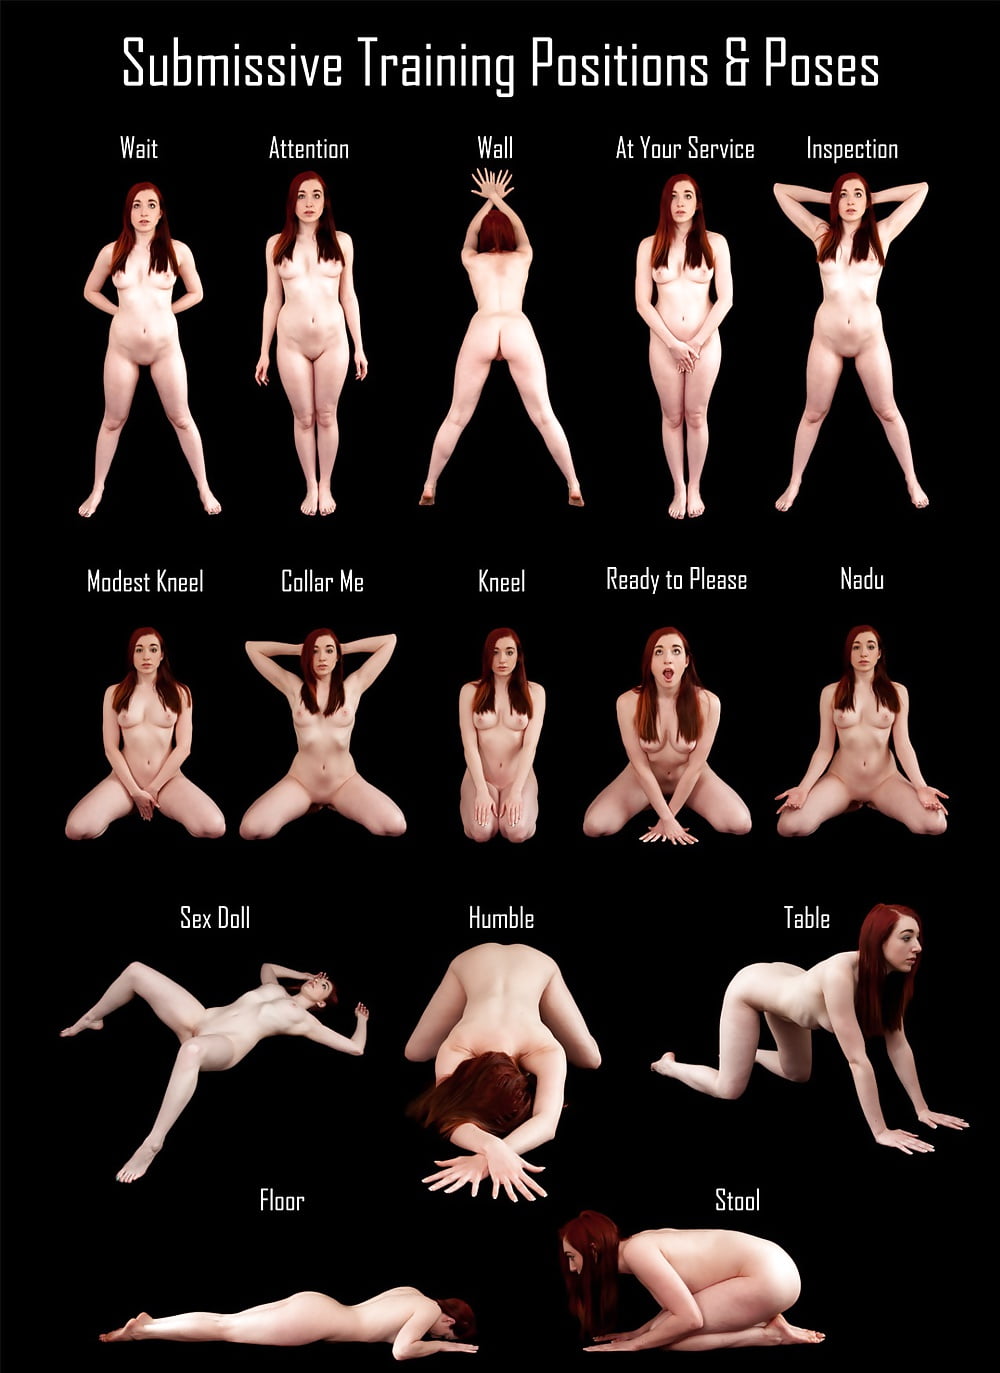 Submissive sexual positions